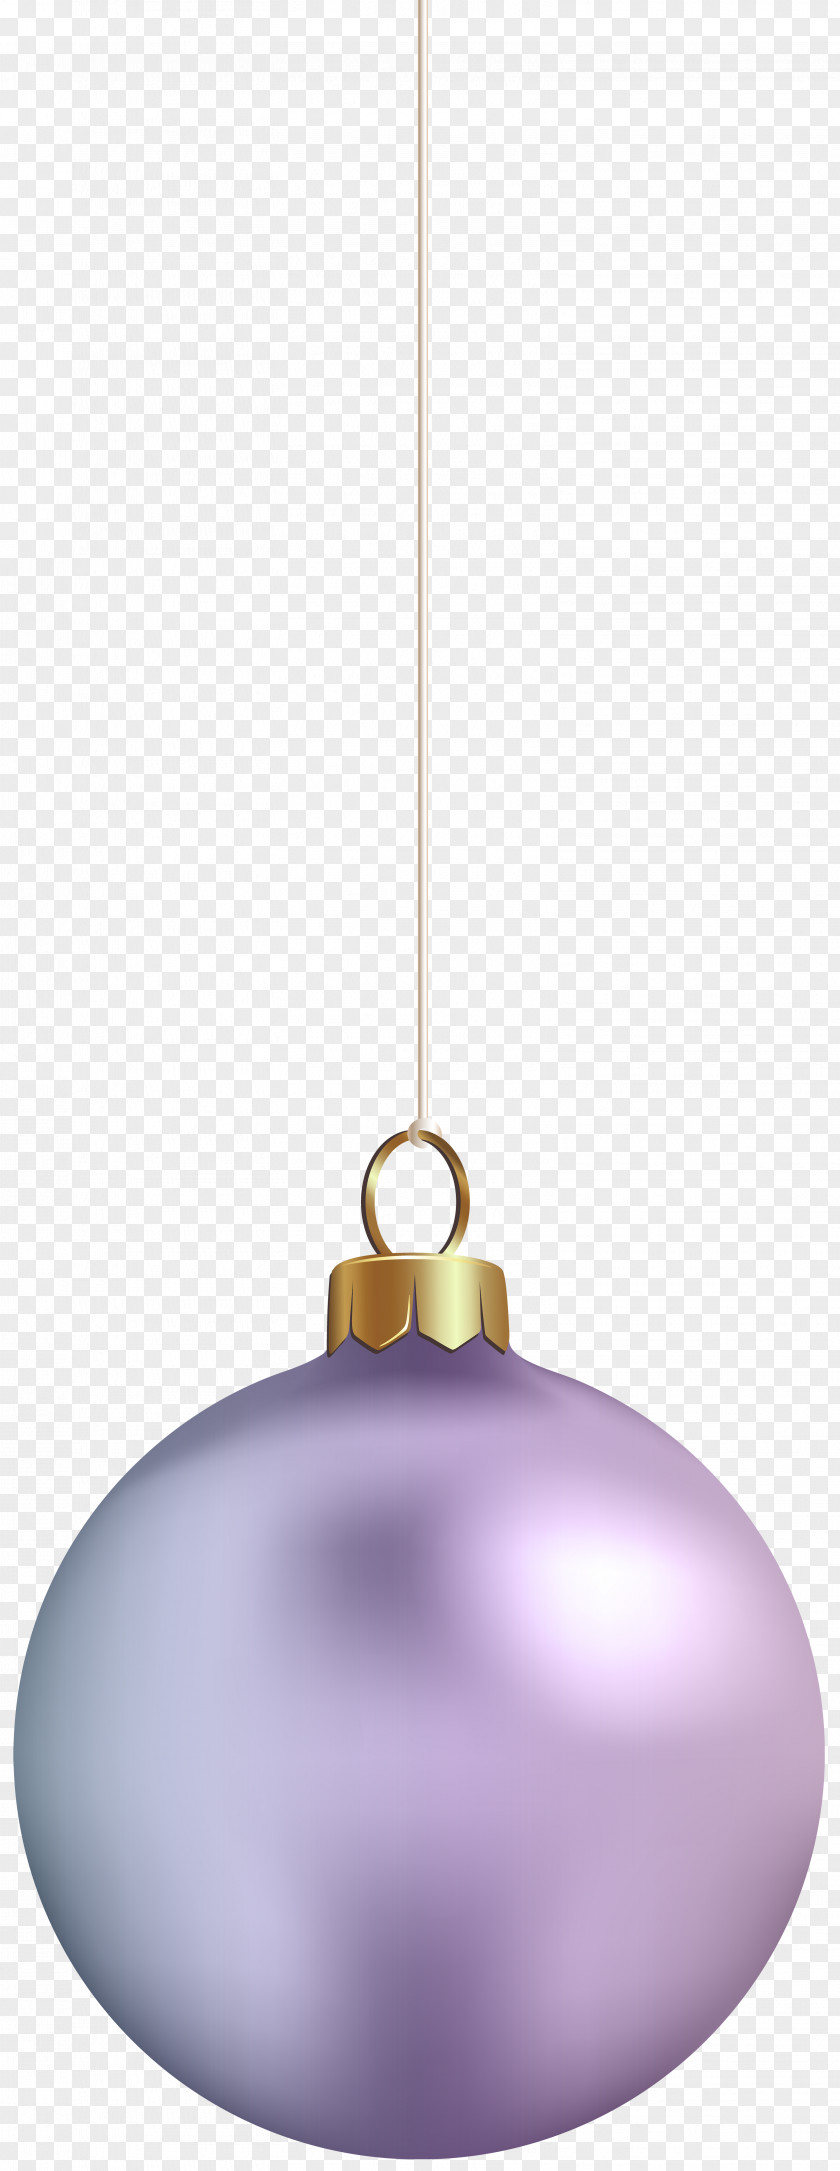 Ornament Christmas Hanging Clip Art PNG